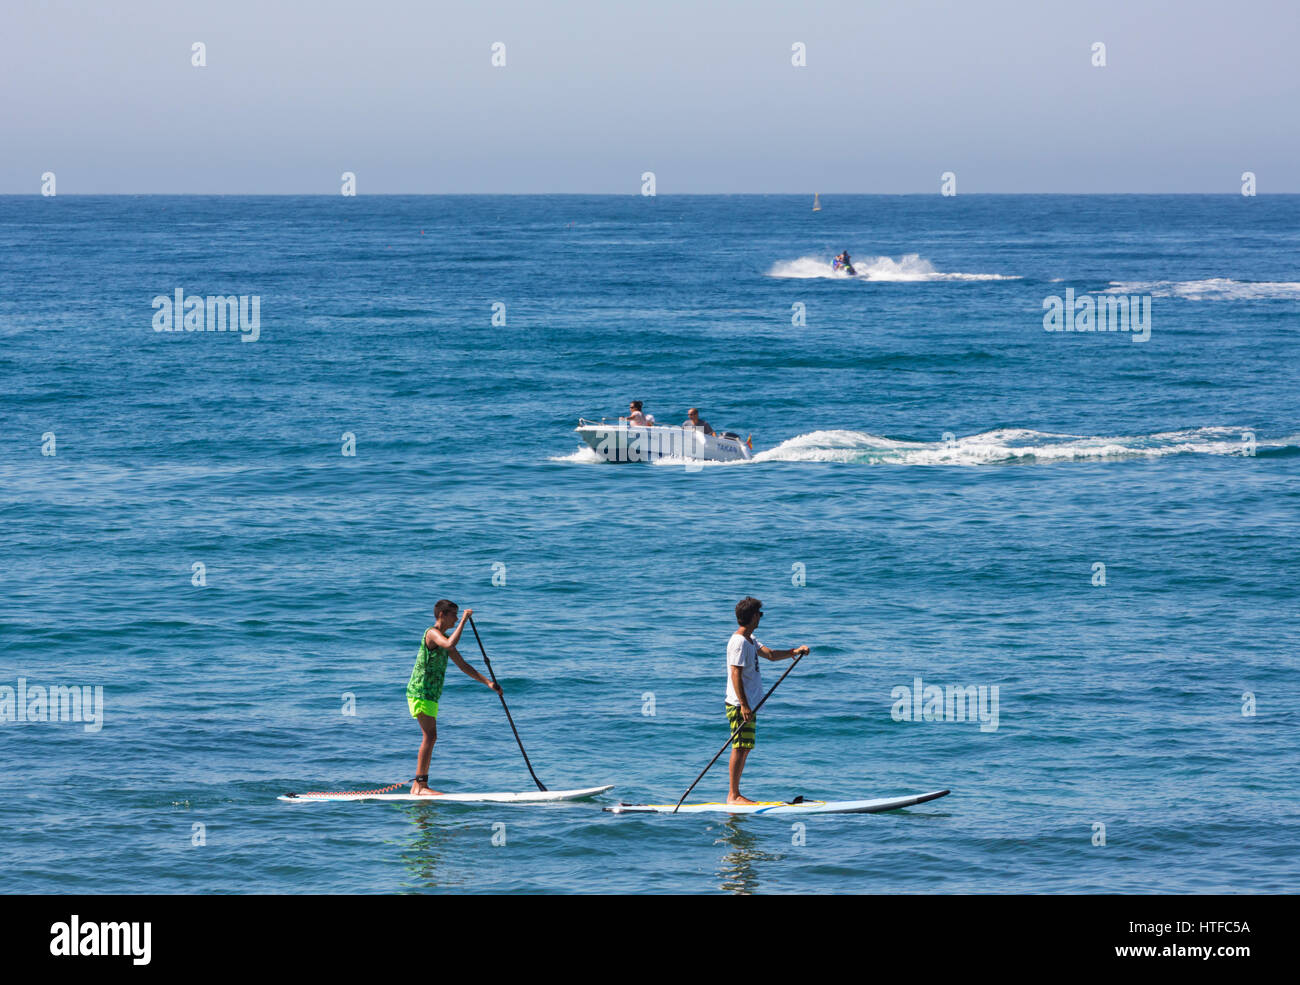 Marbella, Costa del Sol, Malaga Province, Andalusia, southern Spain. Group practicing standup paddle boarding. Stock Photo